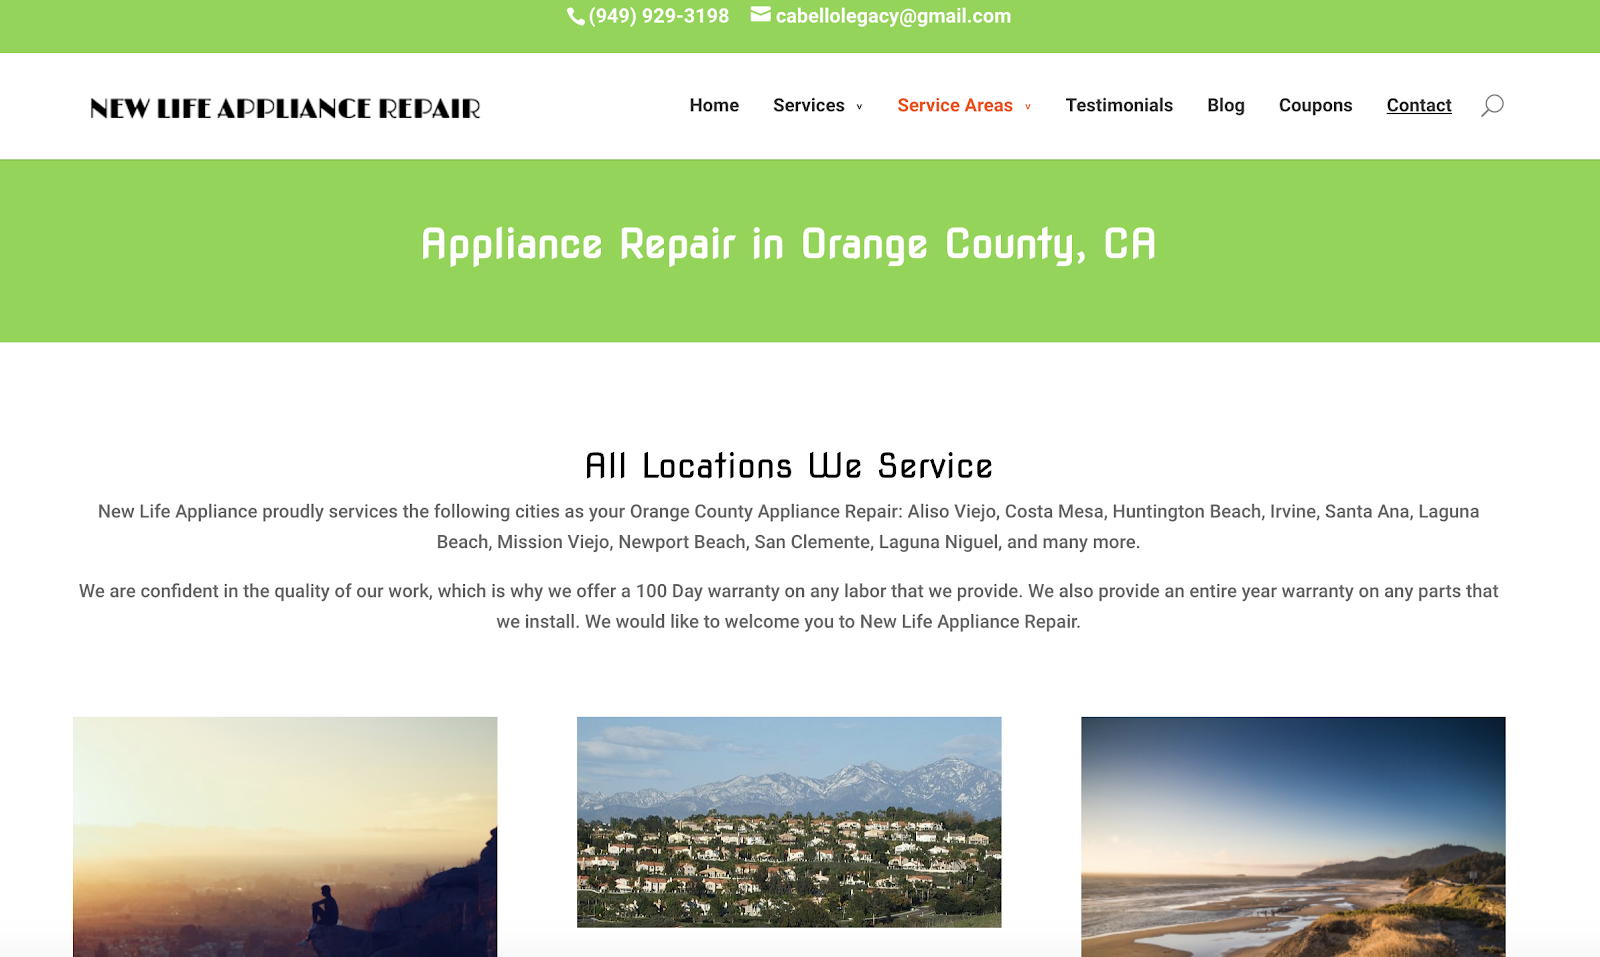 New Life Appliance Repair Location Page